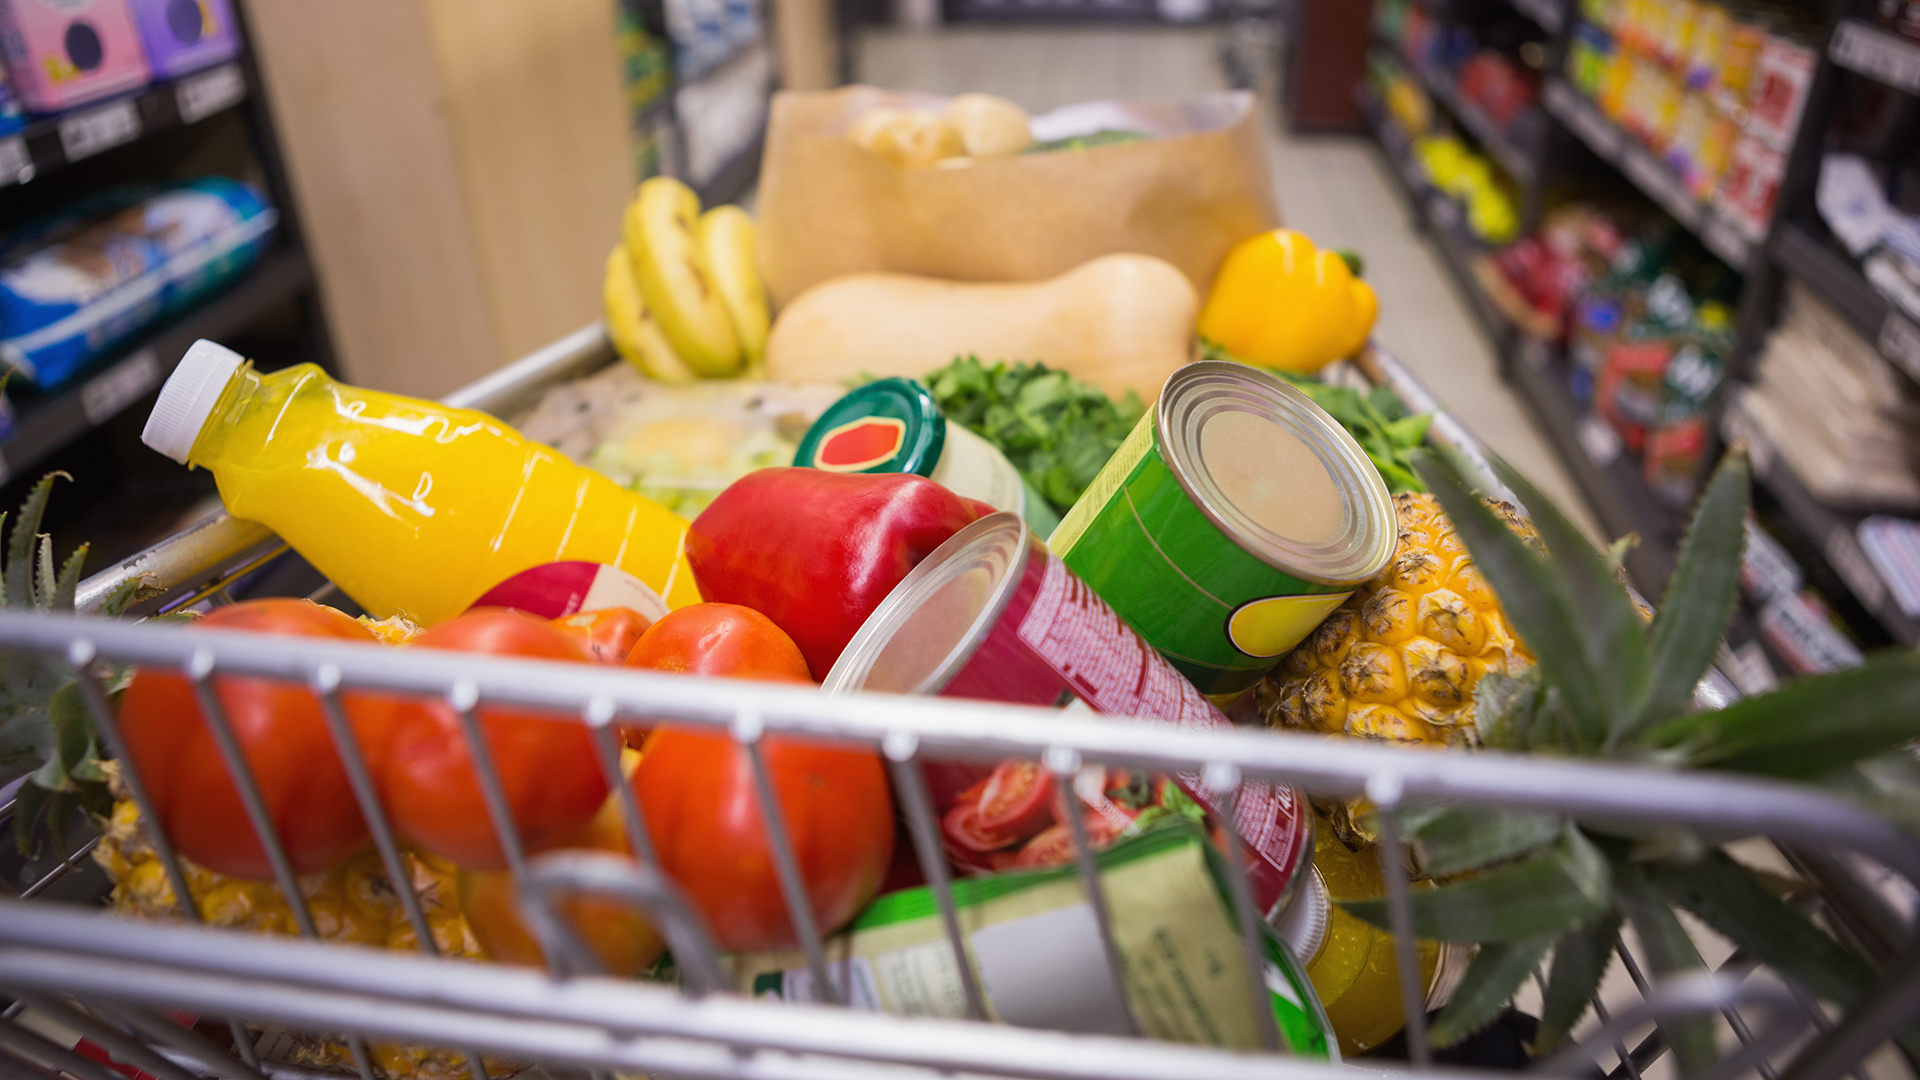 How Much Should You Spend Based on Average Grocery Cost per Month?